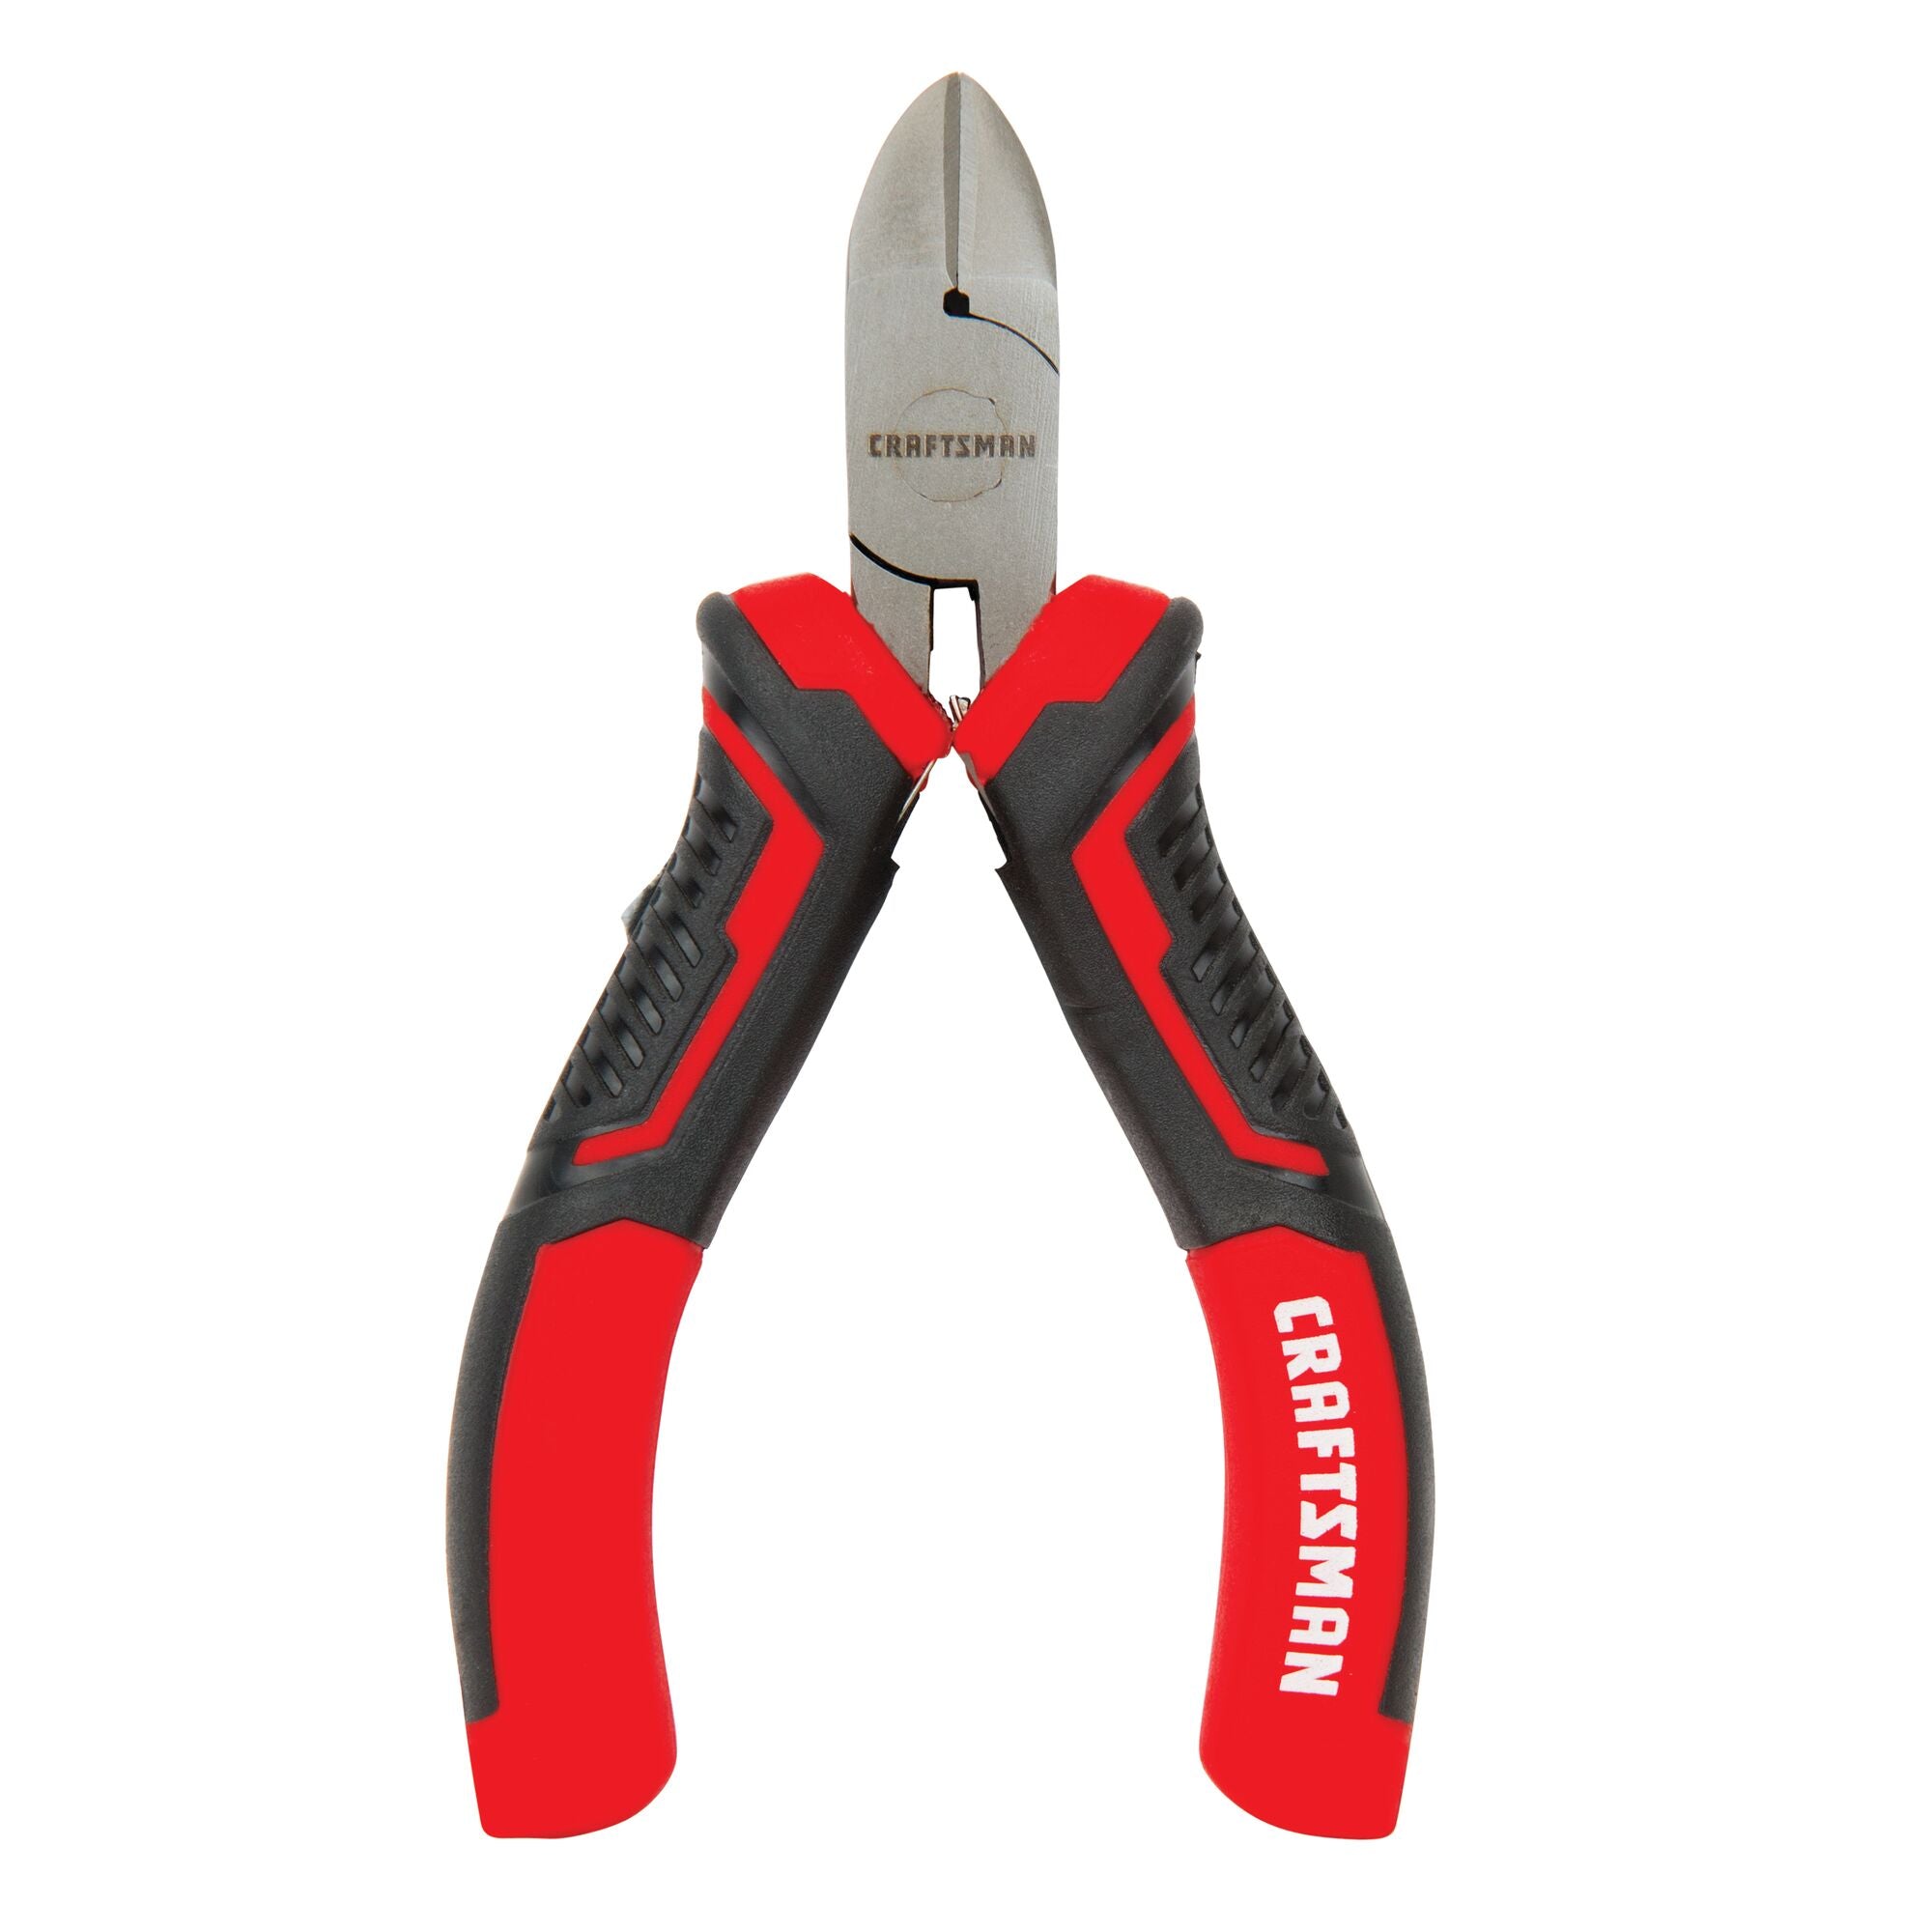 Craftsman 25-Pack Assorted Pliers Plier Set in Red | CMHT82625